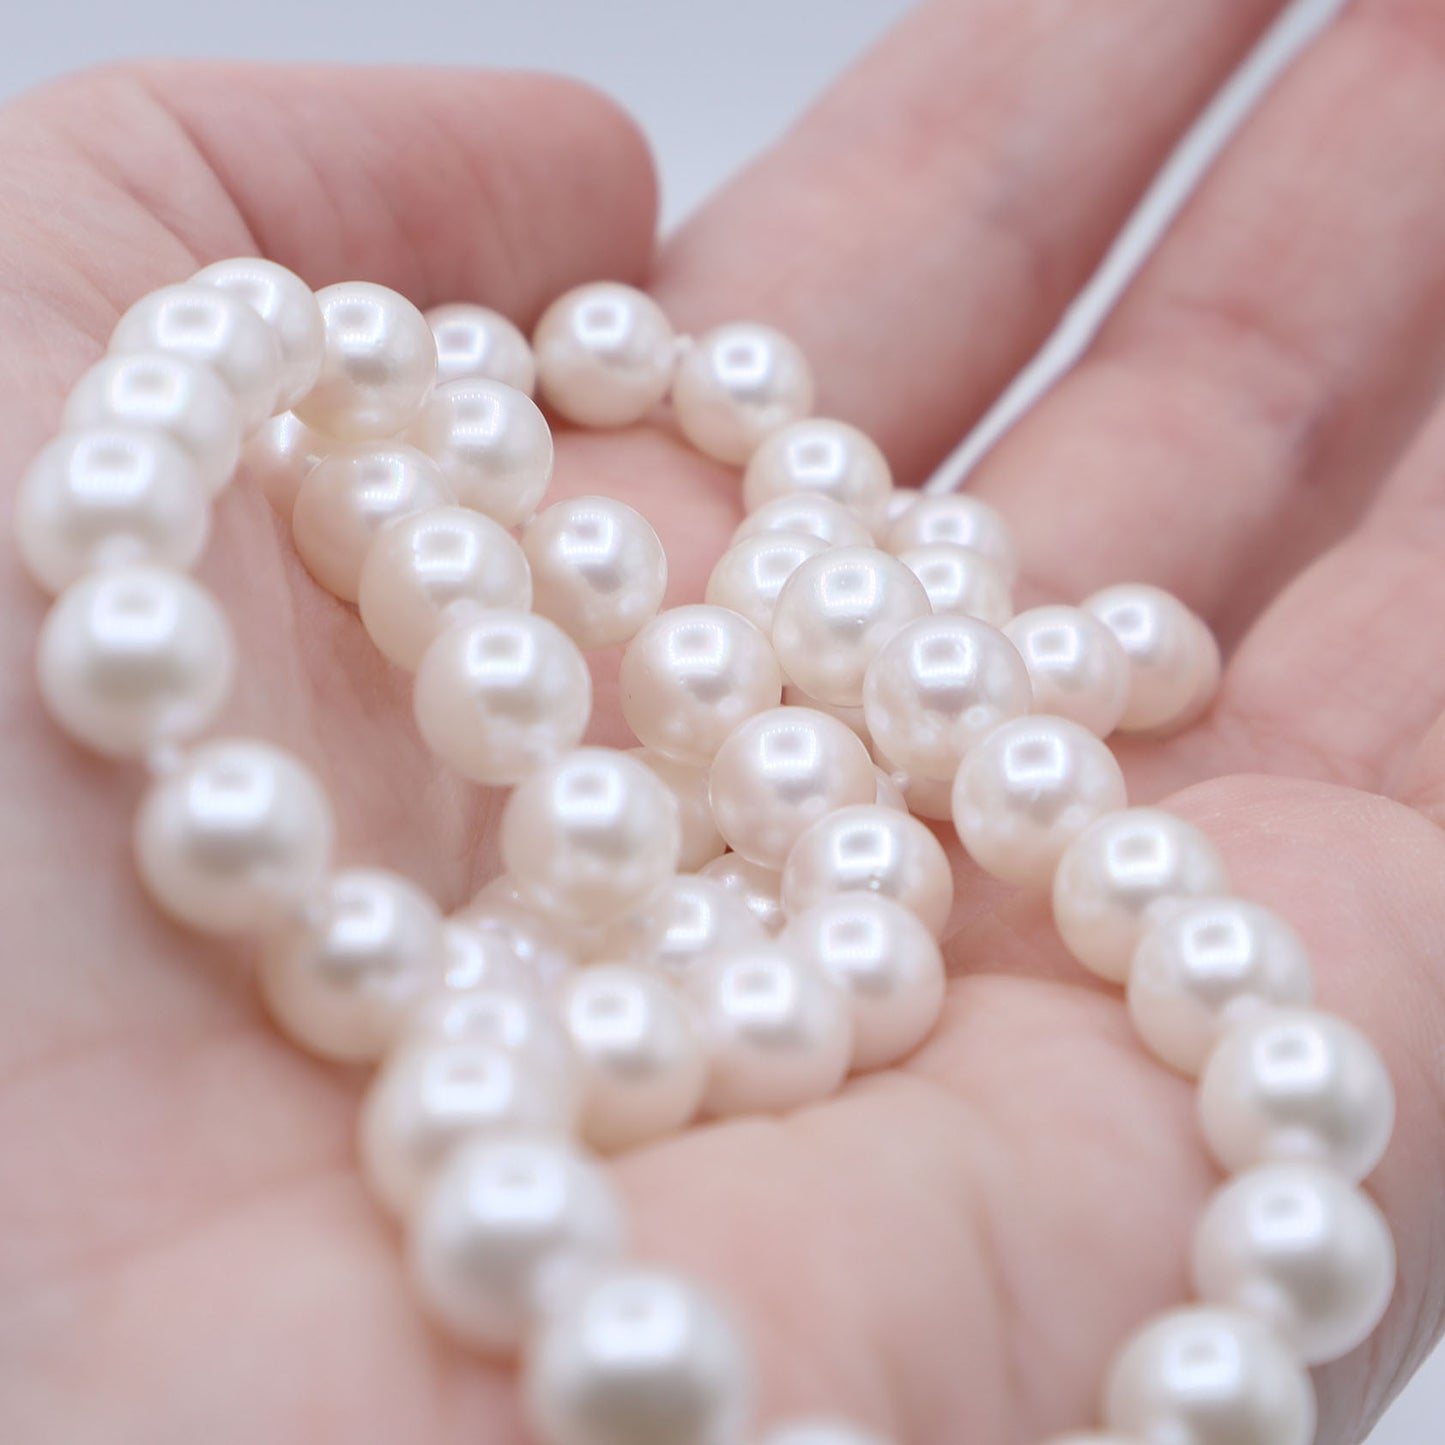 SALE 35% OFF - White Pearl Strand Necklace